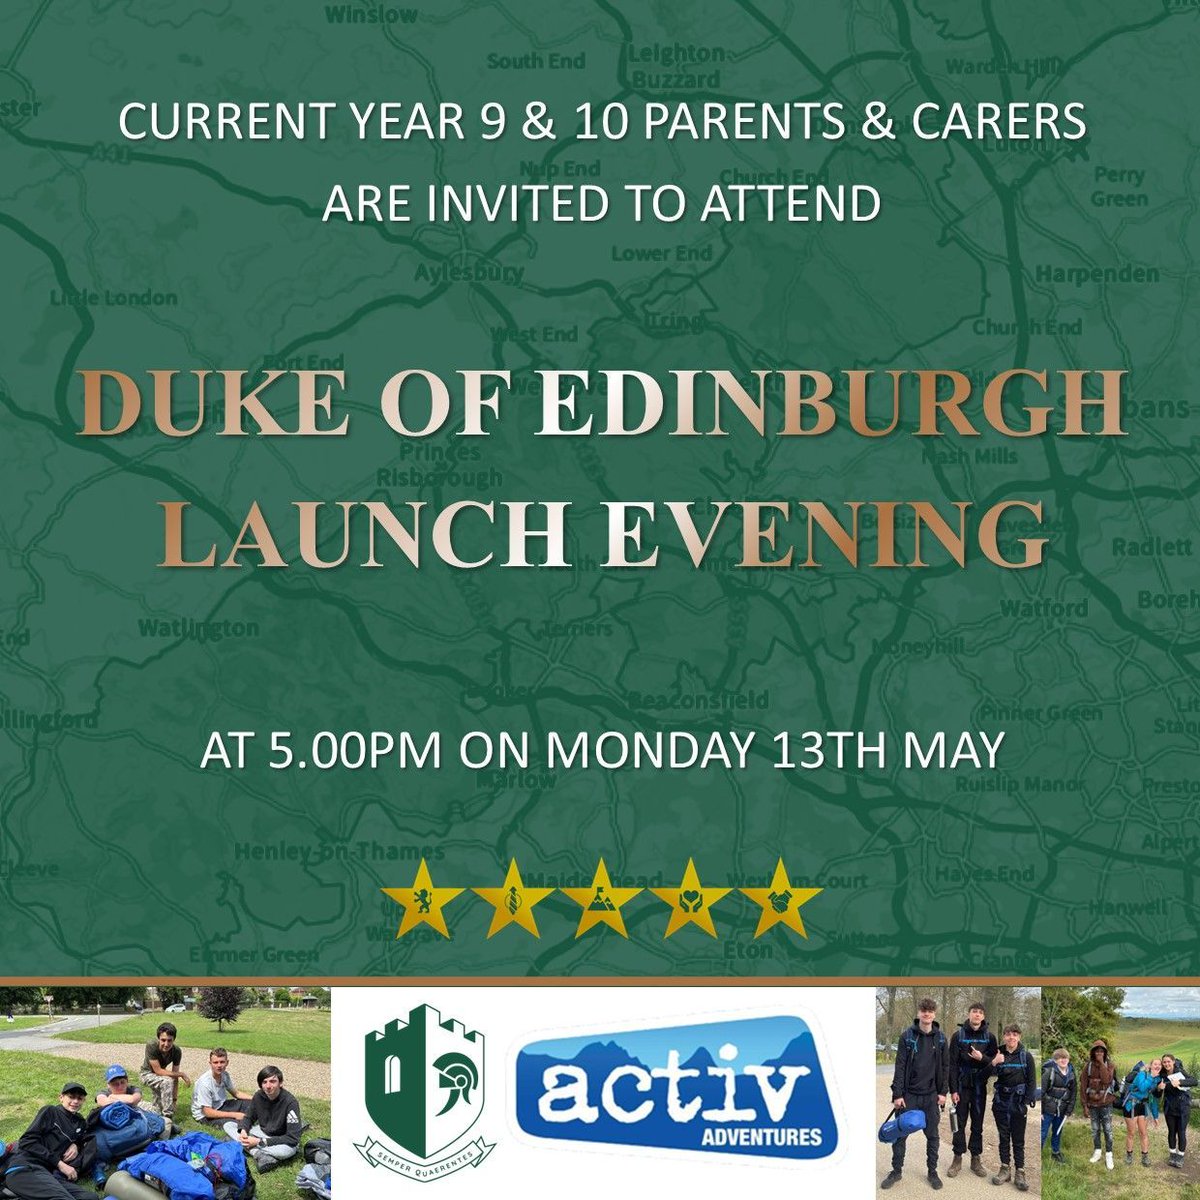 This year's Duke of Edinburgh launch meeting is taking place on Monday 13th May at 5pm, current Year 10 and 9 students, parents and carers are welcome to attend. For more information please visit: buff.ly/4beLSef #adeyfieldenrichment #courage #ambition